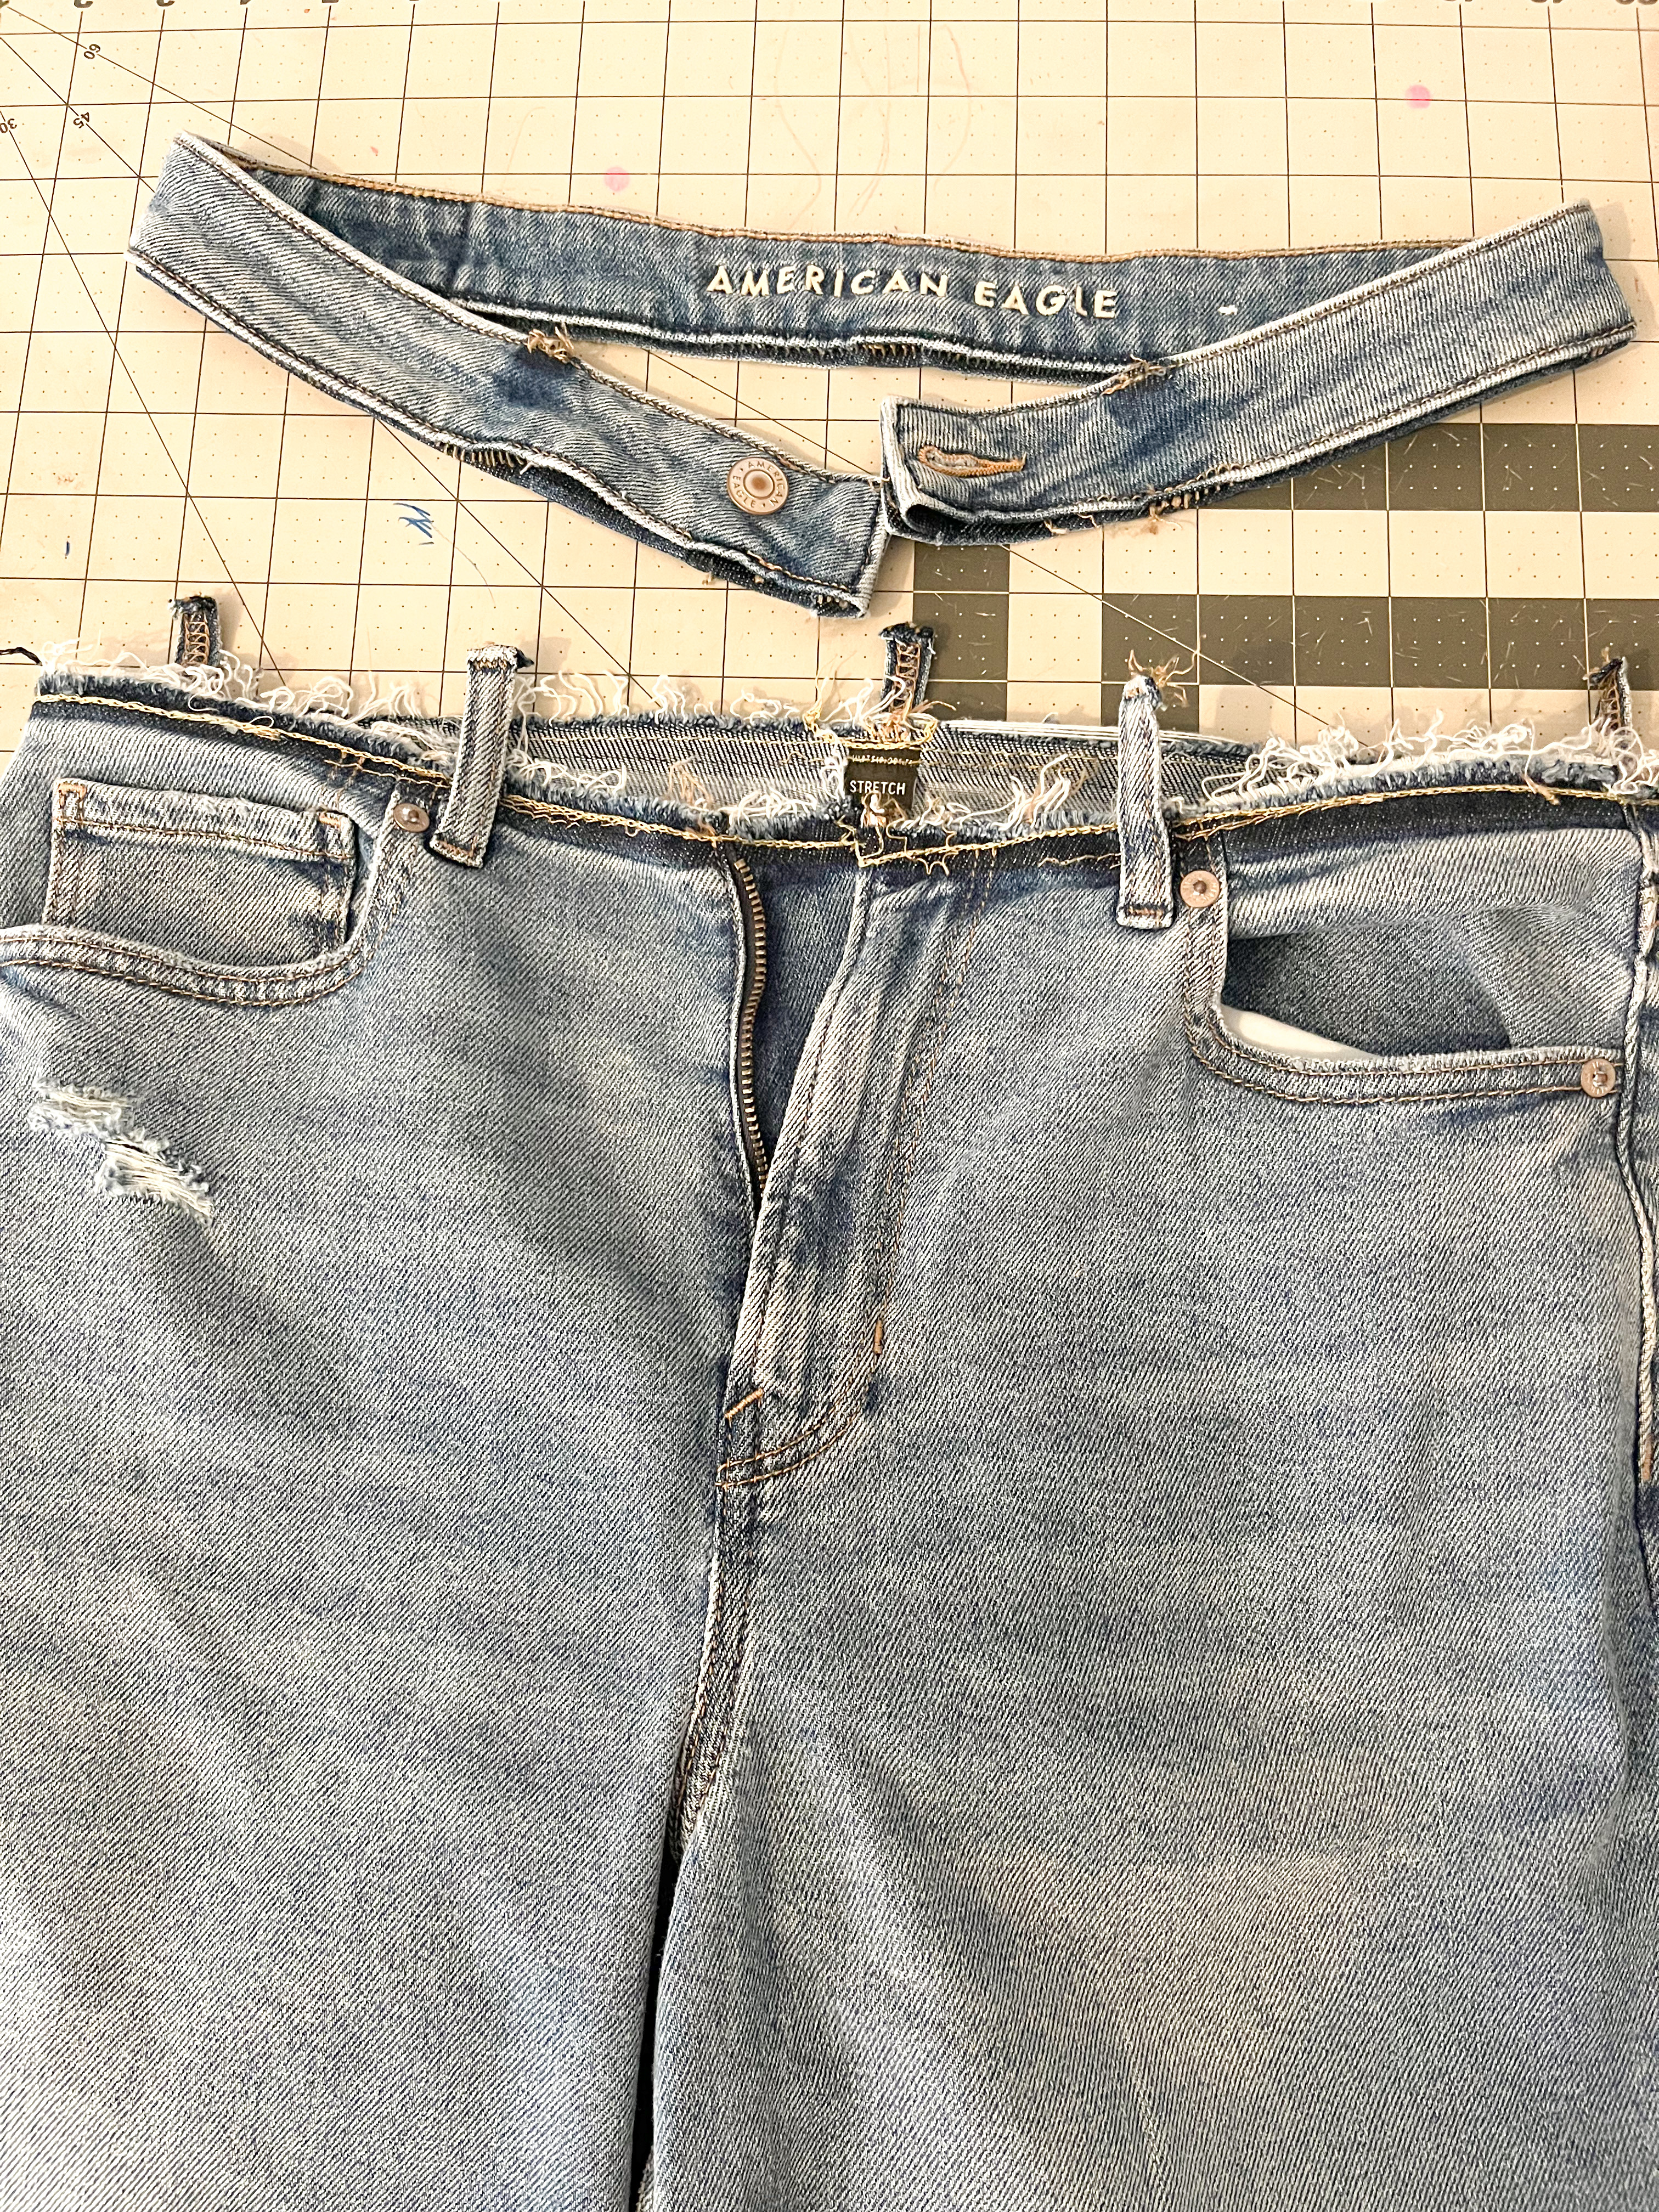 Creations: How to Alter a Jeans Waist